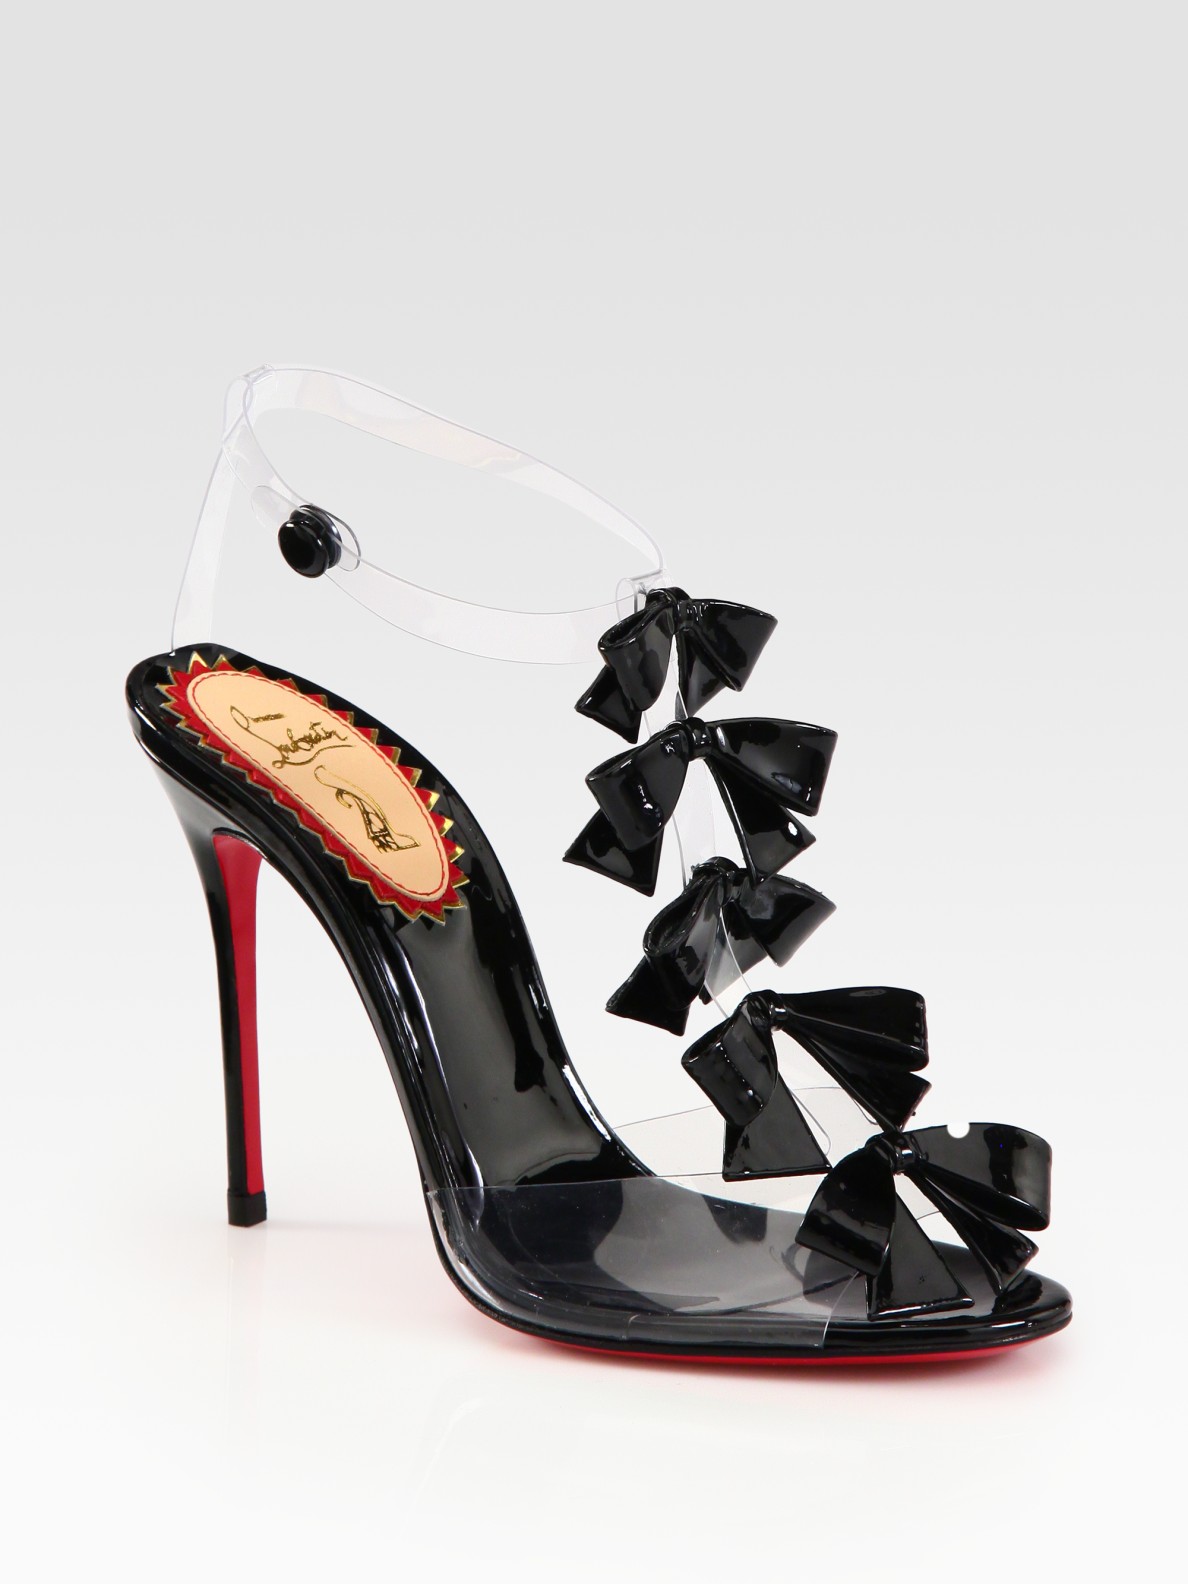 christian louboutin pink studded pumps - christian louboutin leather and patent leather sandals | cosmetics ...